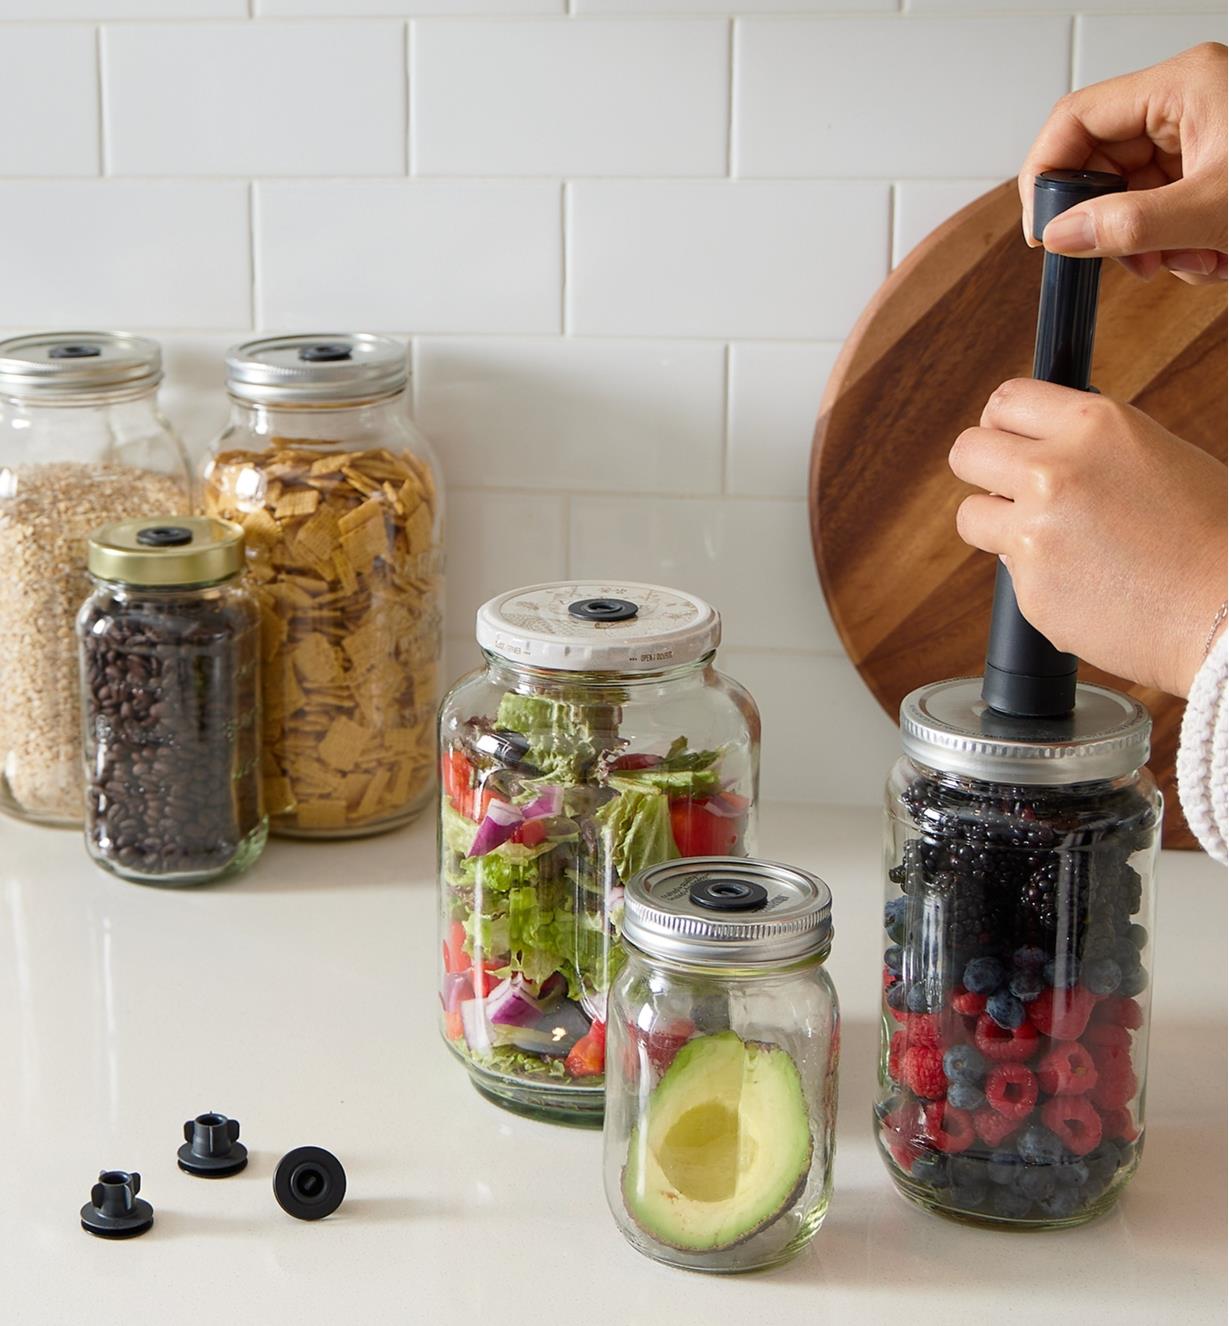 Half an avocado, berries, oats, cereal and other foods stored in jars using the Airtender system